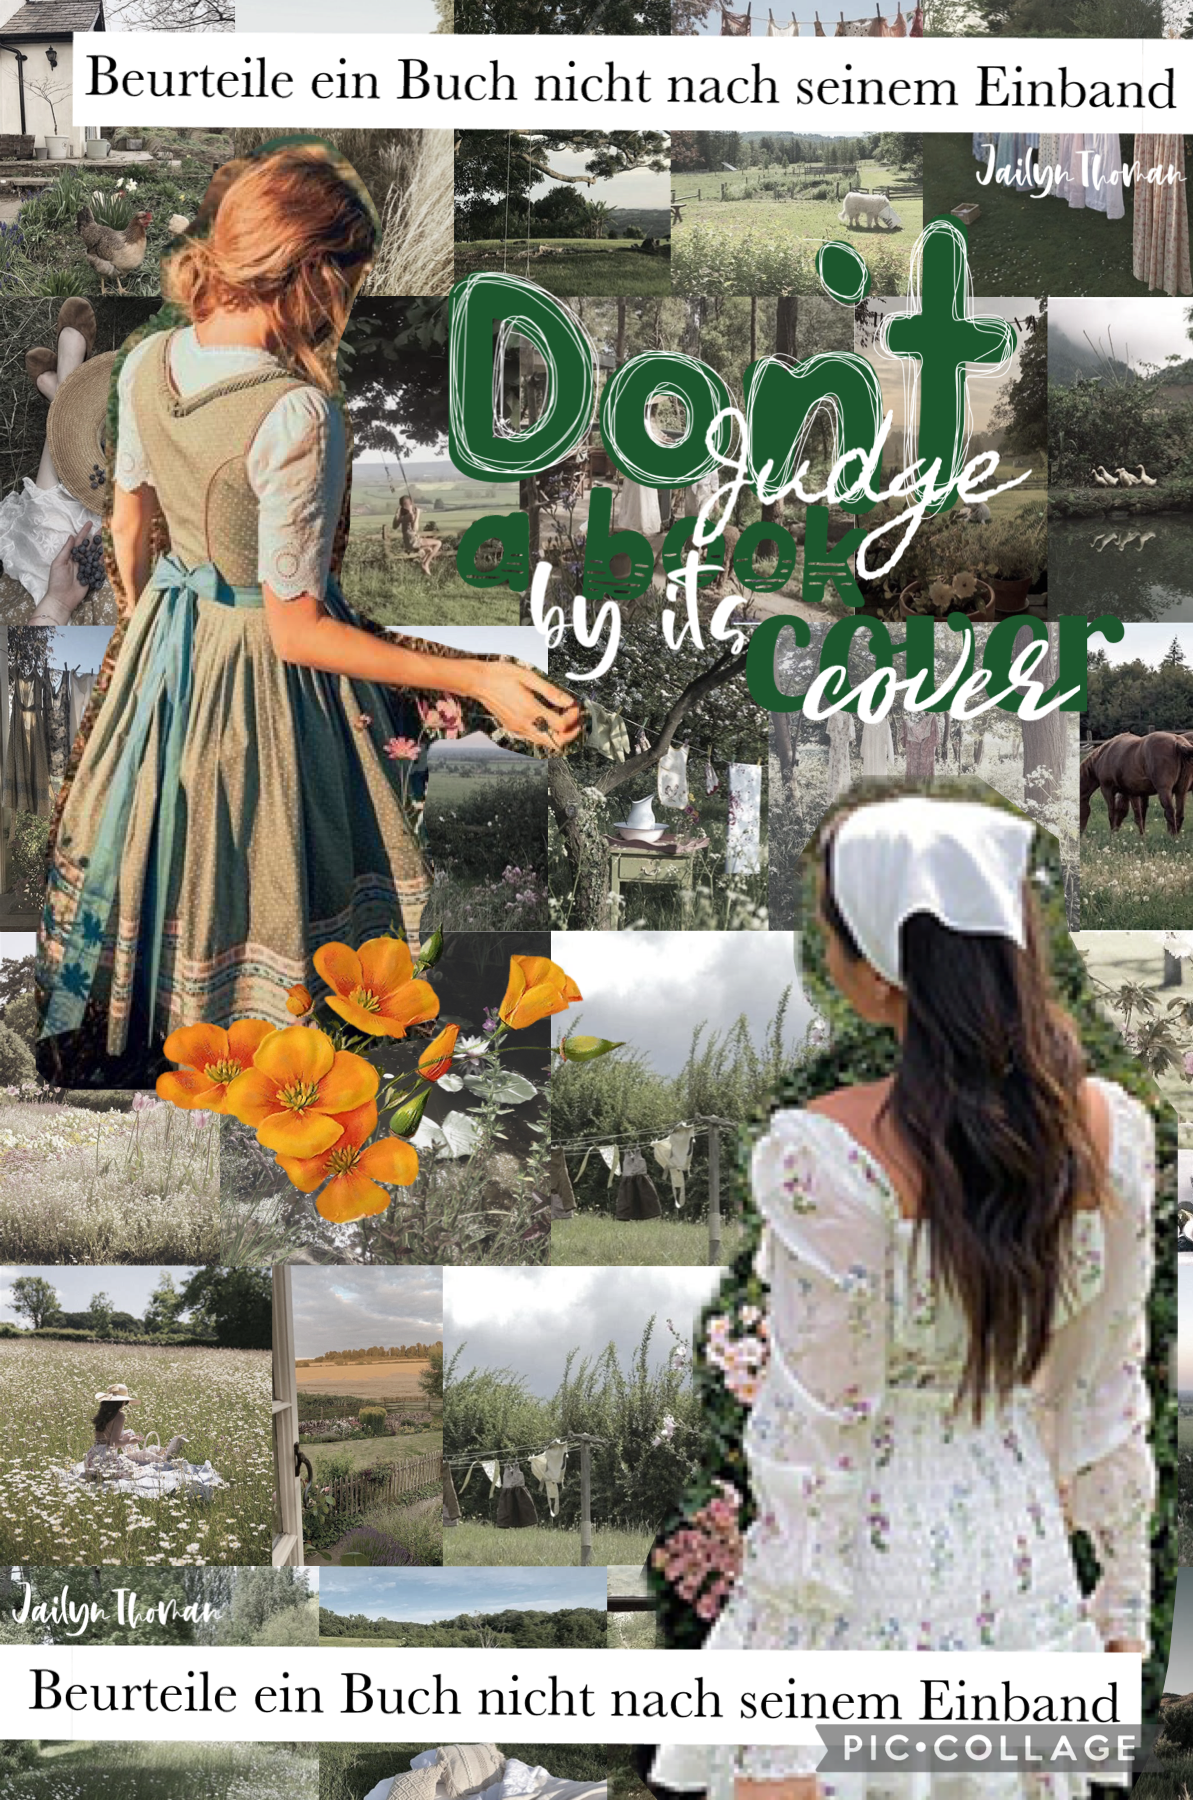 ✨TAP✨
I was going to make this an Amish collage but I couldn’t find any Amish tumblr’s. I am learning German so that is why I put German in this collage! Just remember god loves you all! (6/1/21)